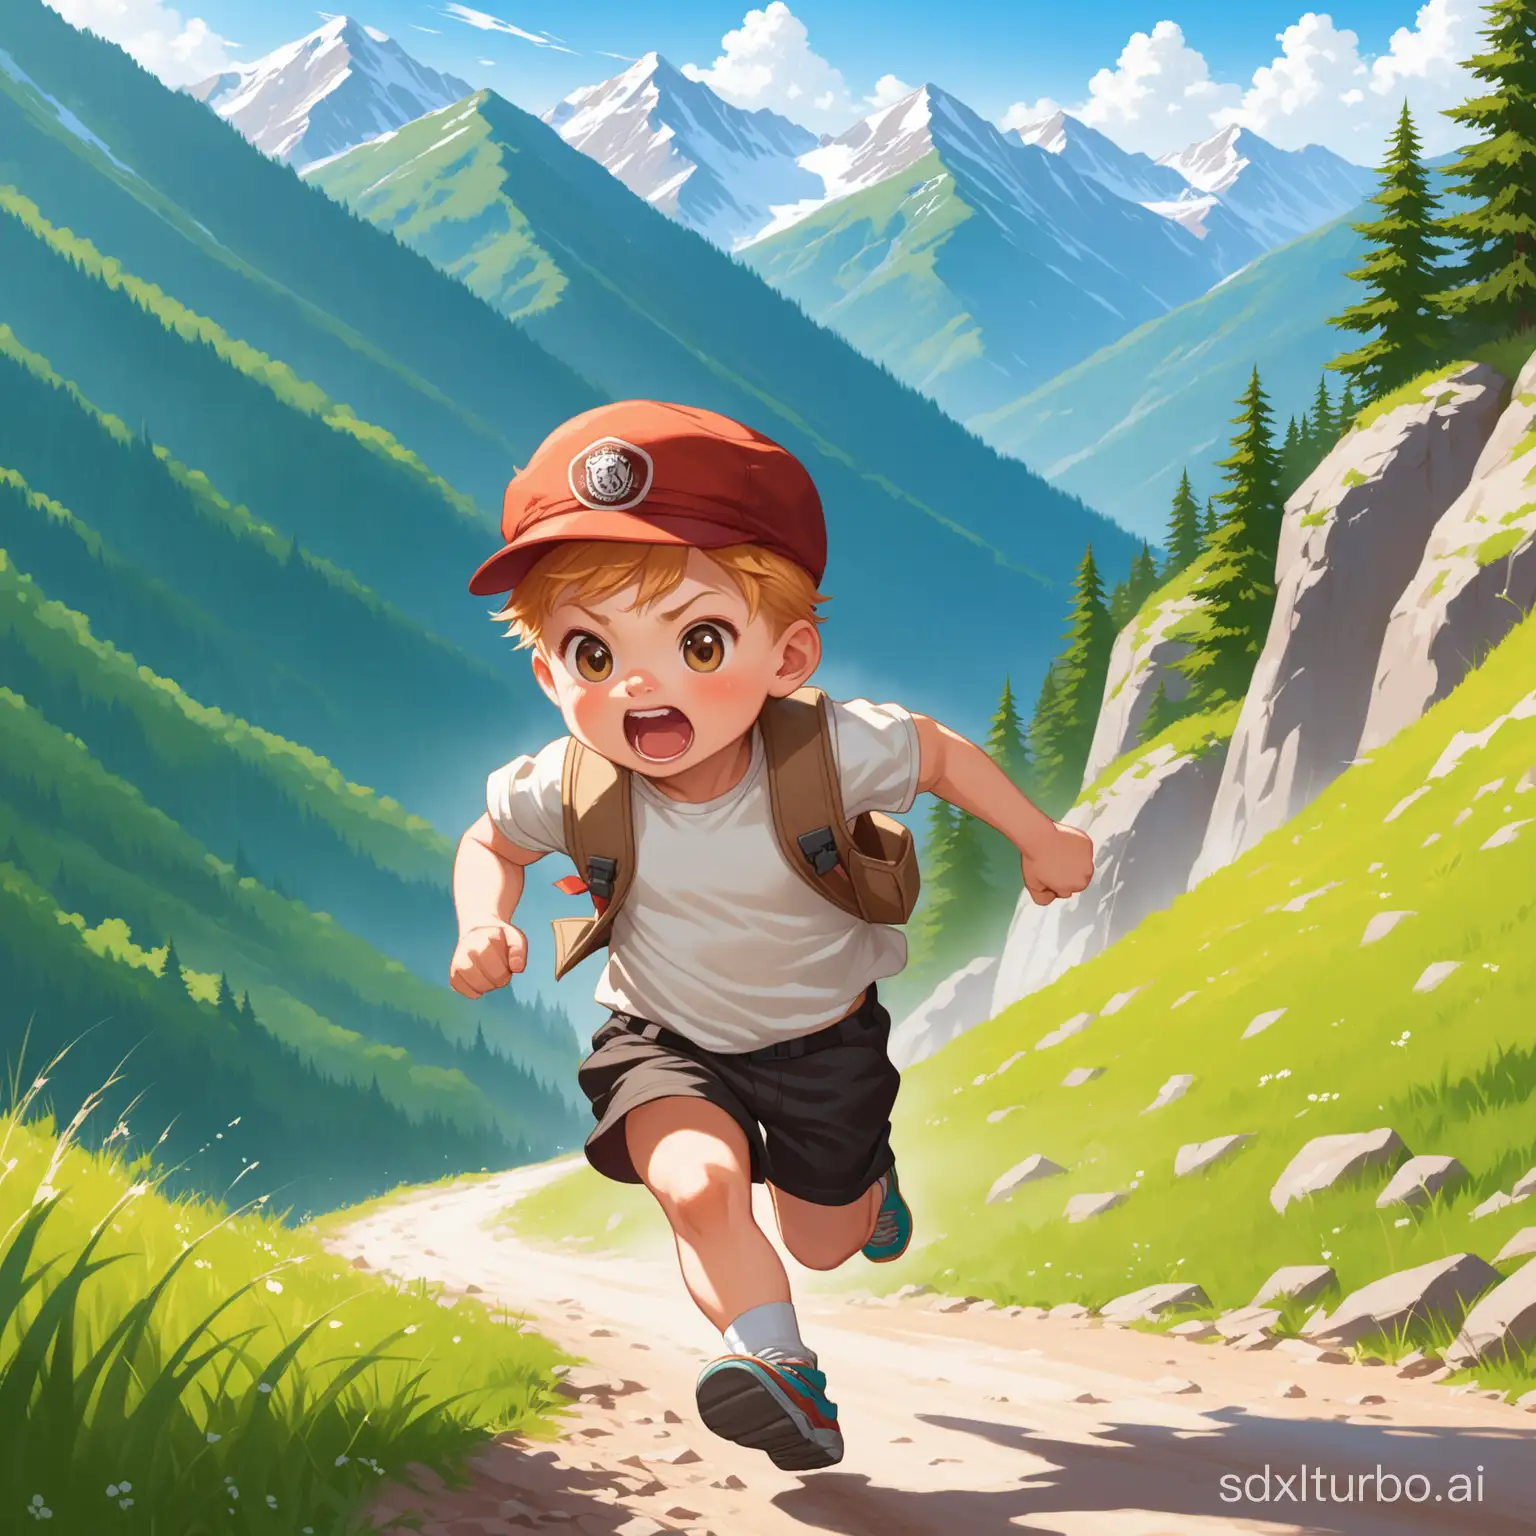 The little hooligan running in the mountains.